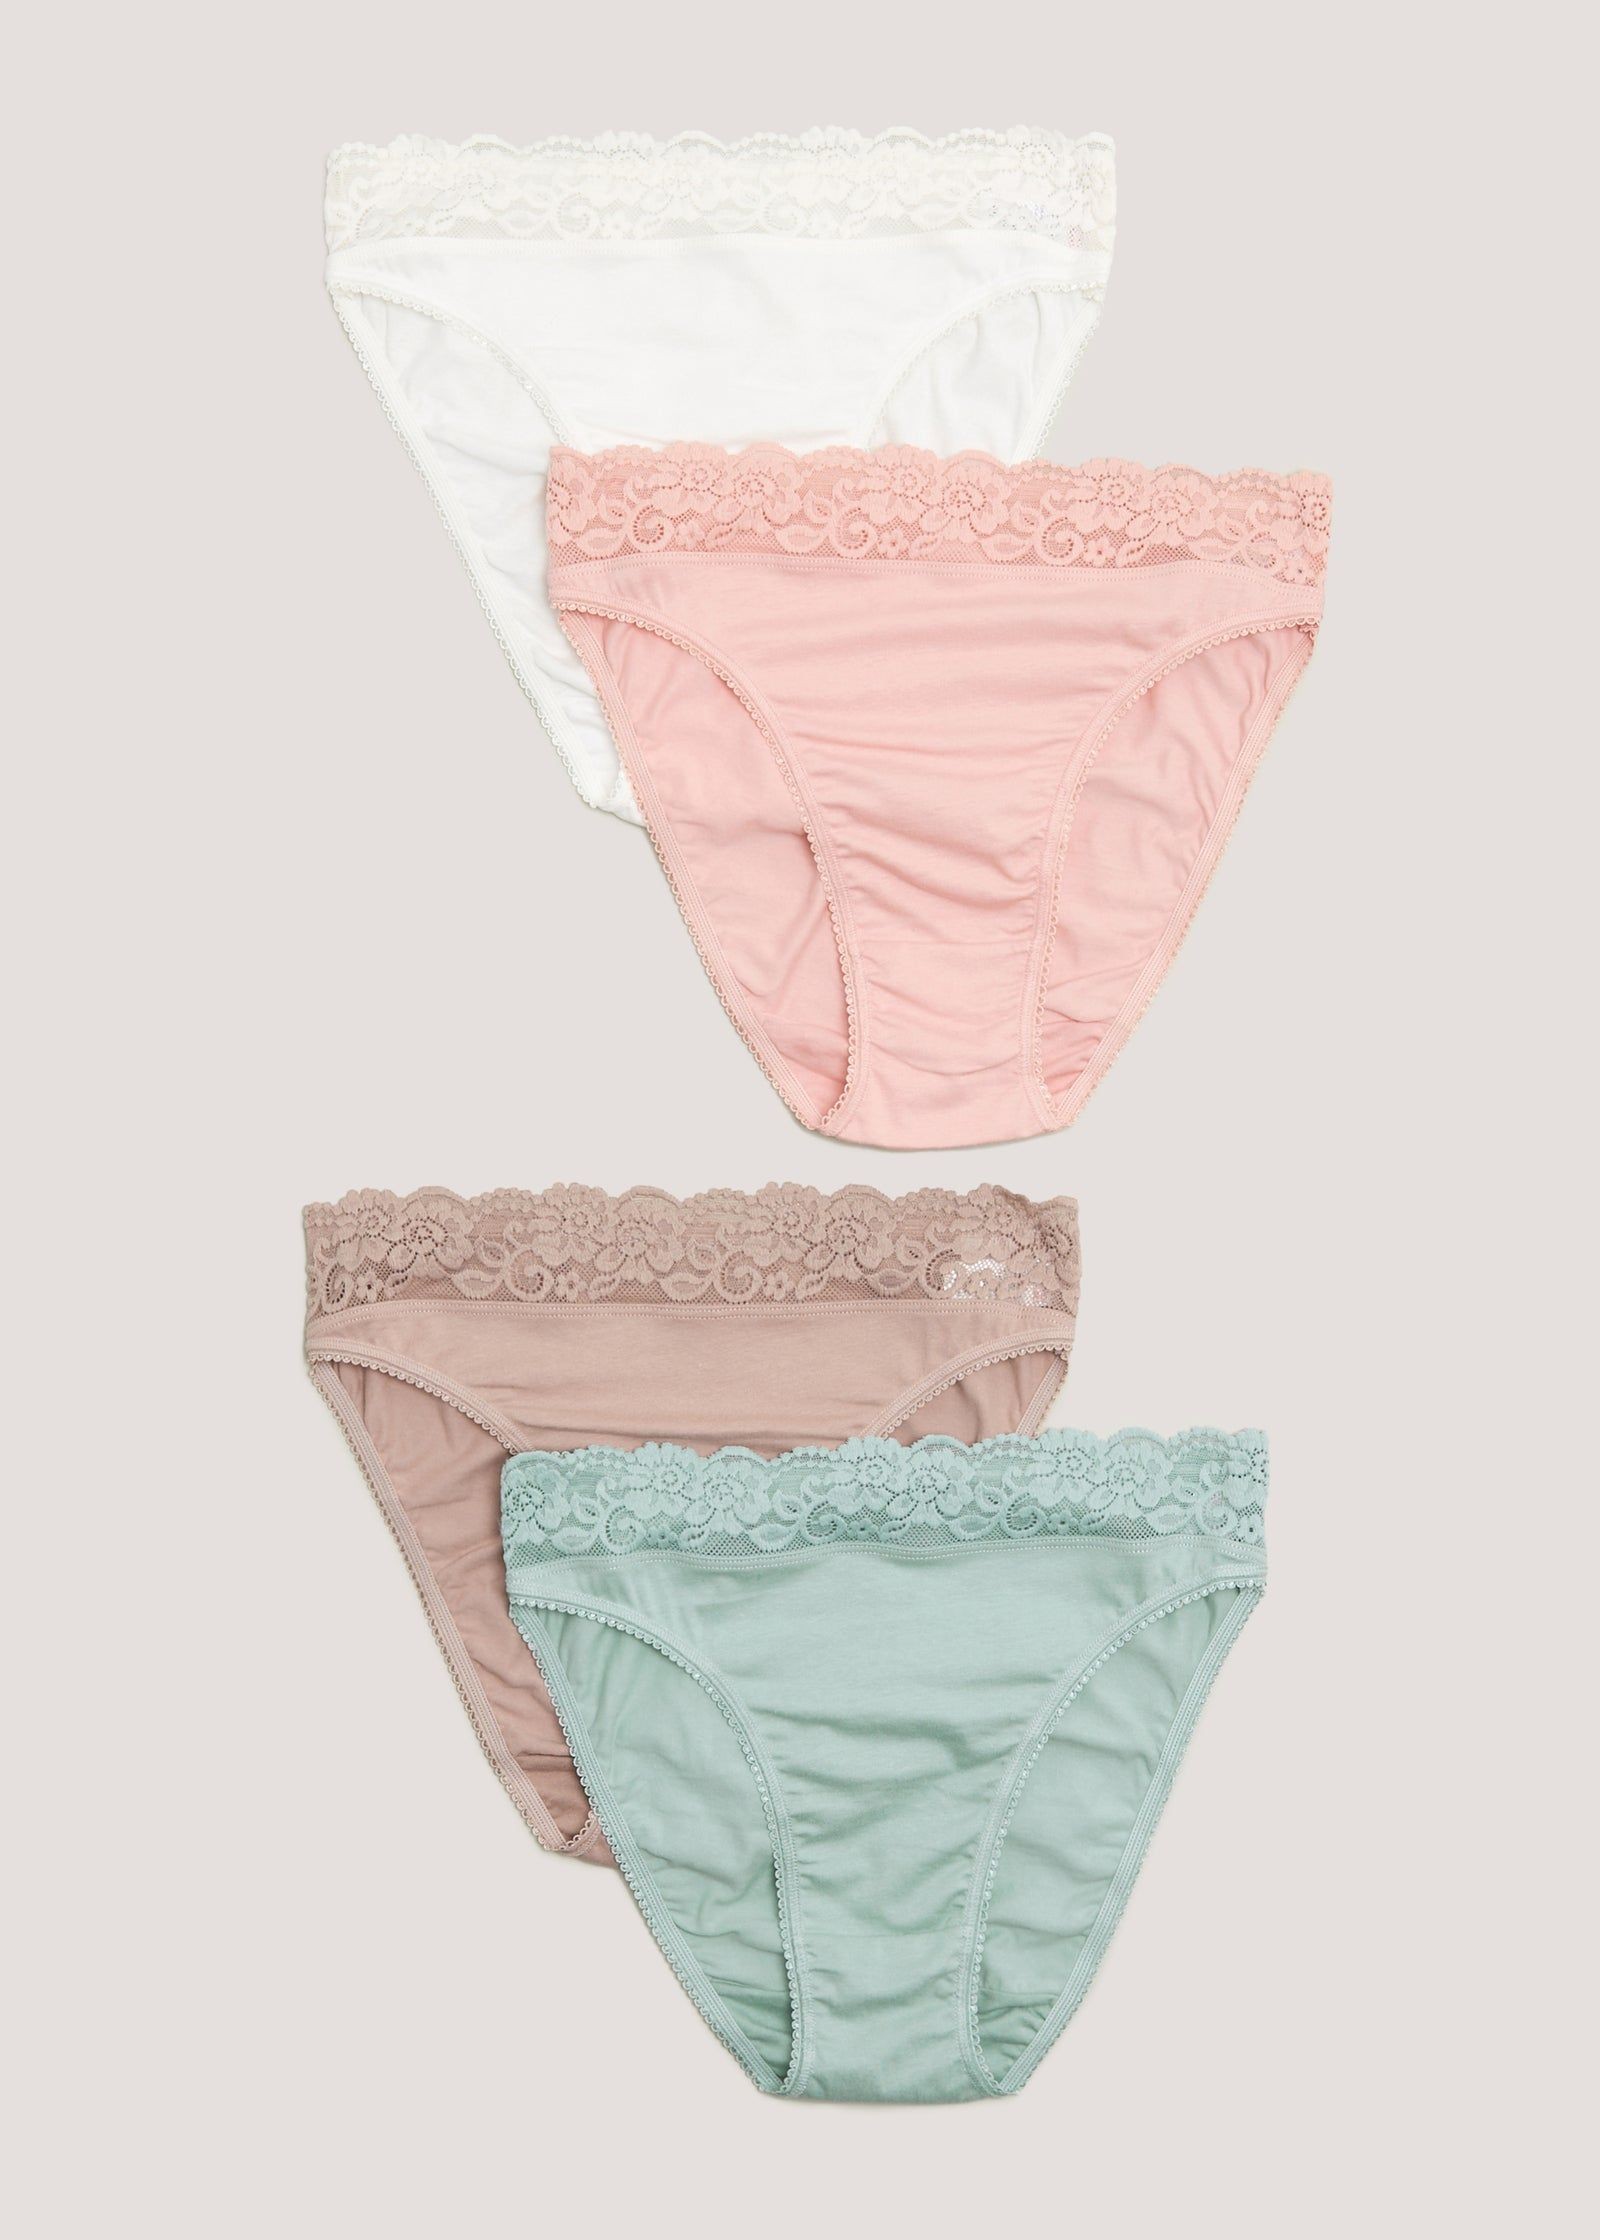 Buy Girls 10 Pack Knickers Online in UAE from Matalan